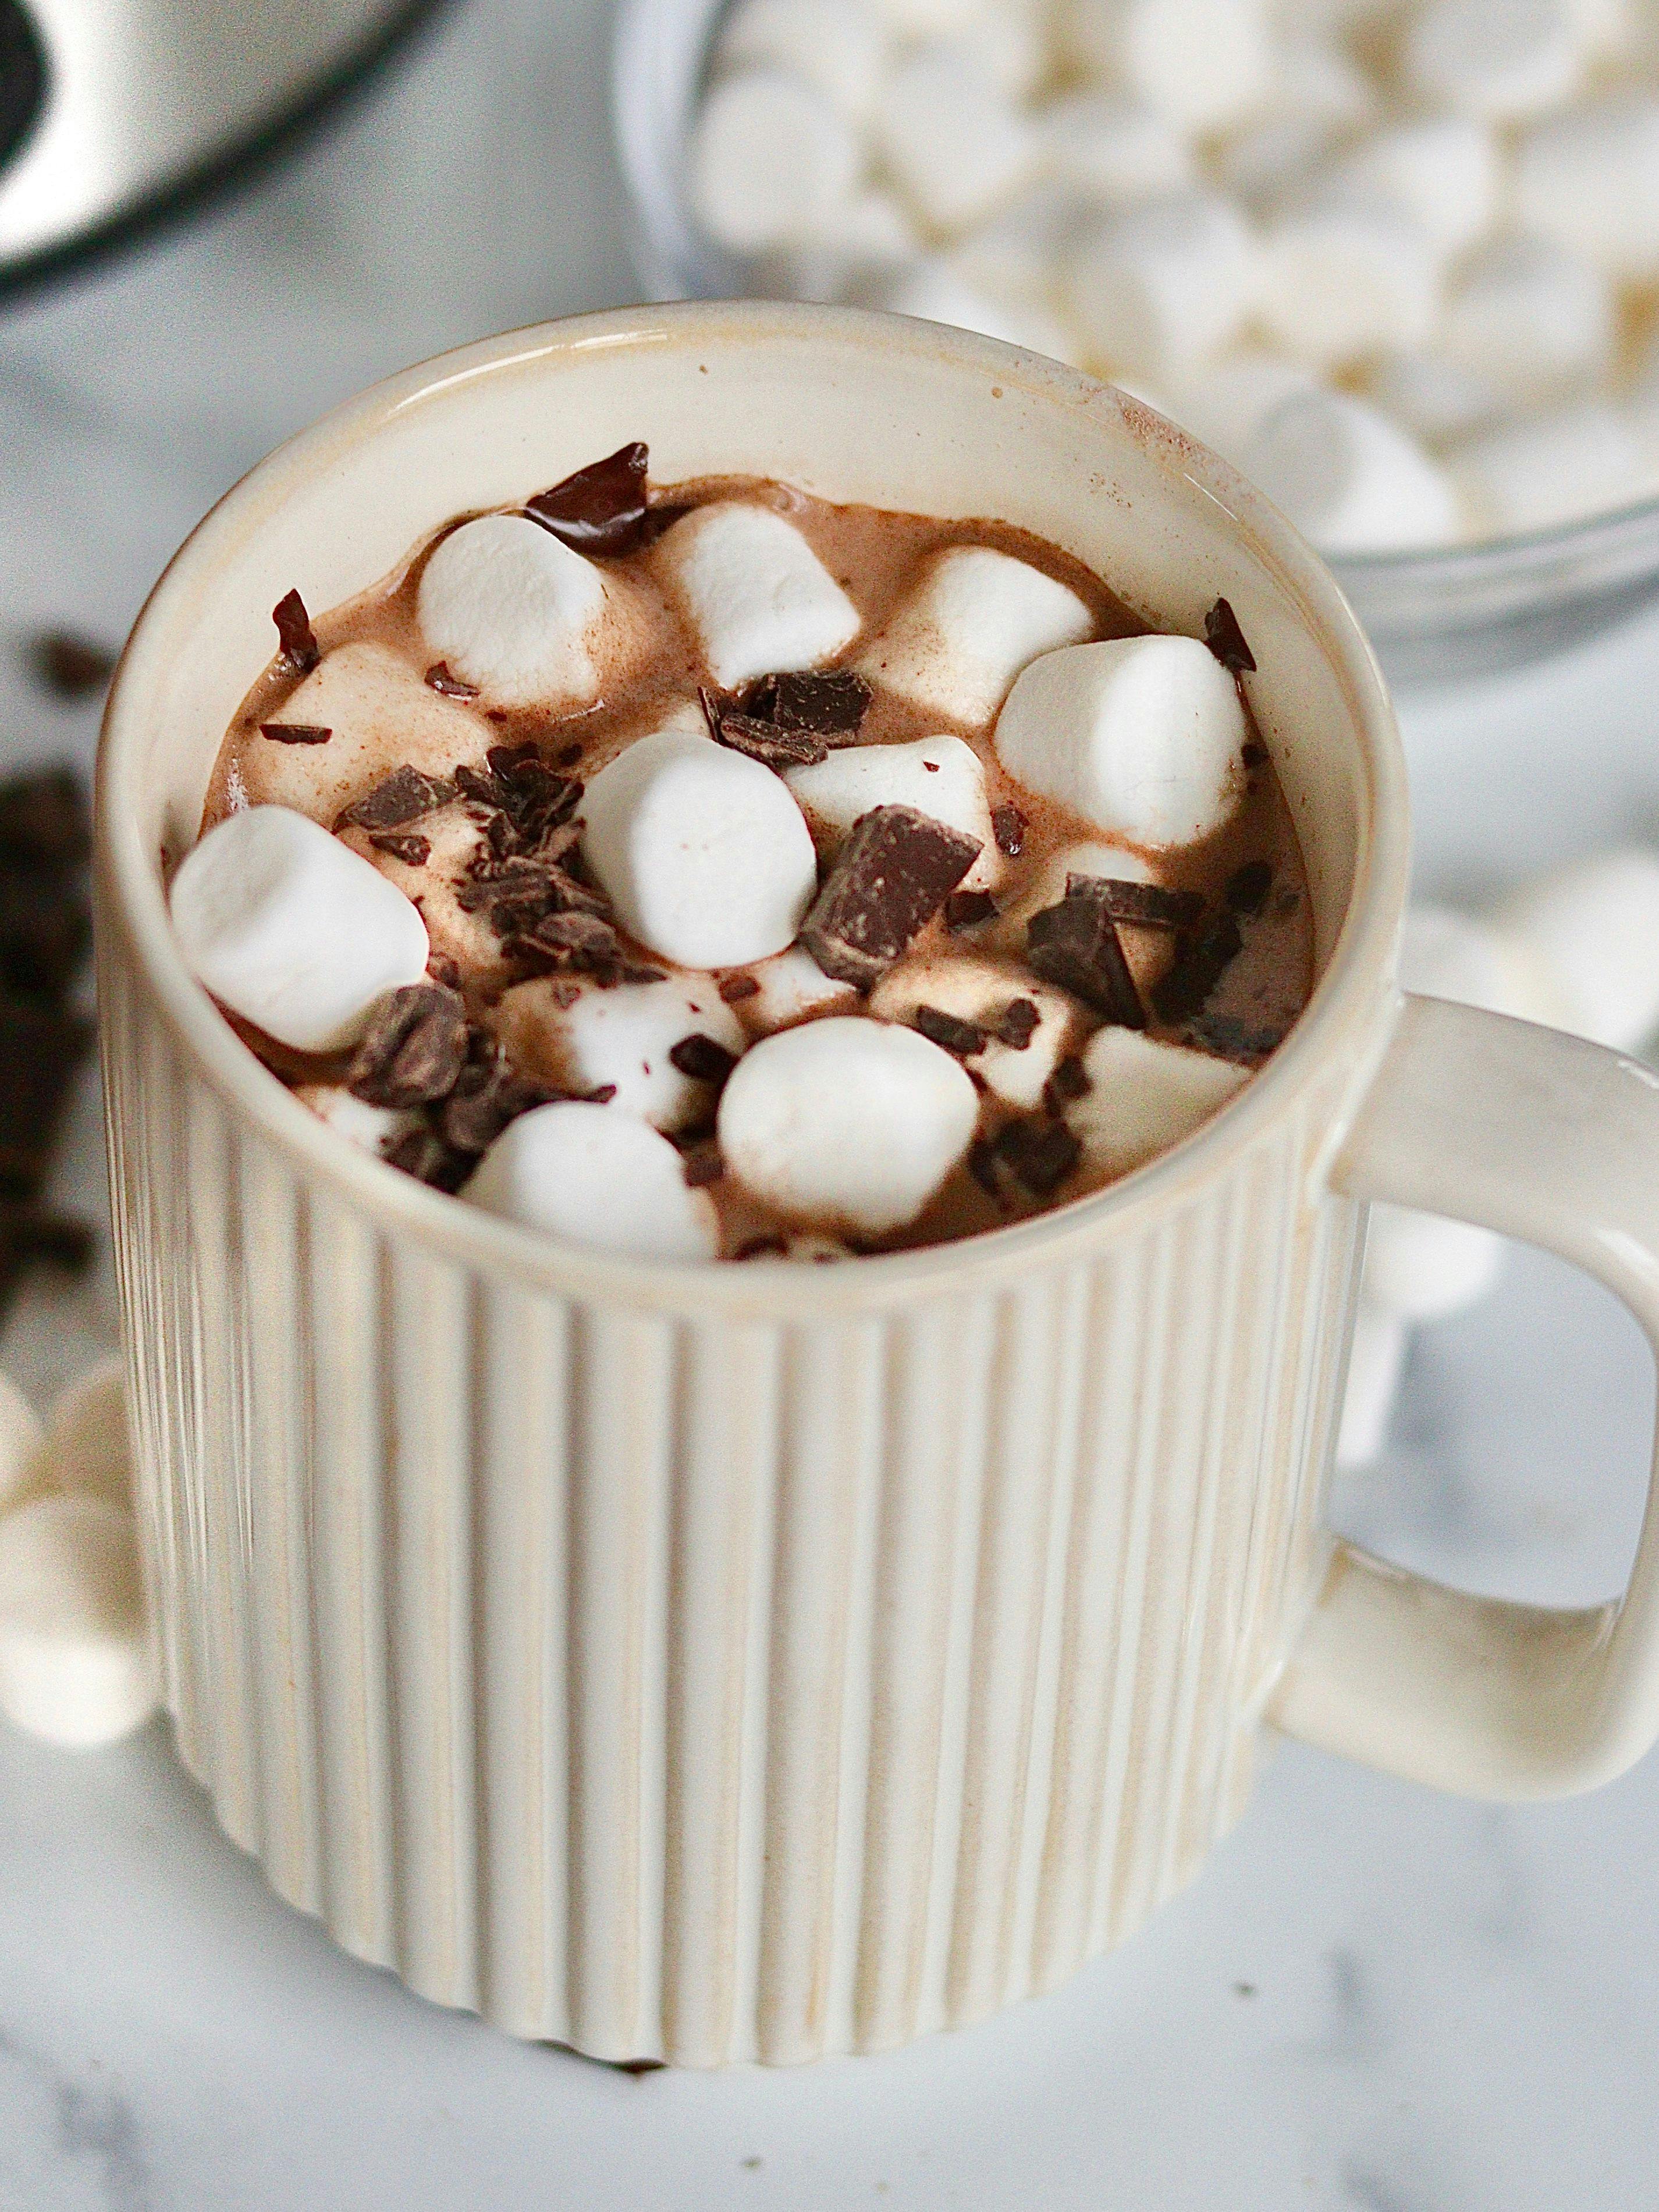 A mug of hot chocolate next to a slow cooker, chocolate shavings, marshmallows and organic dairy products used to make hot chocolate.